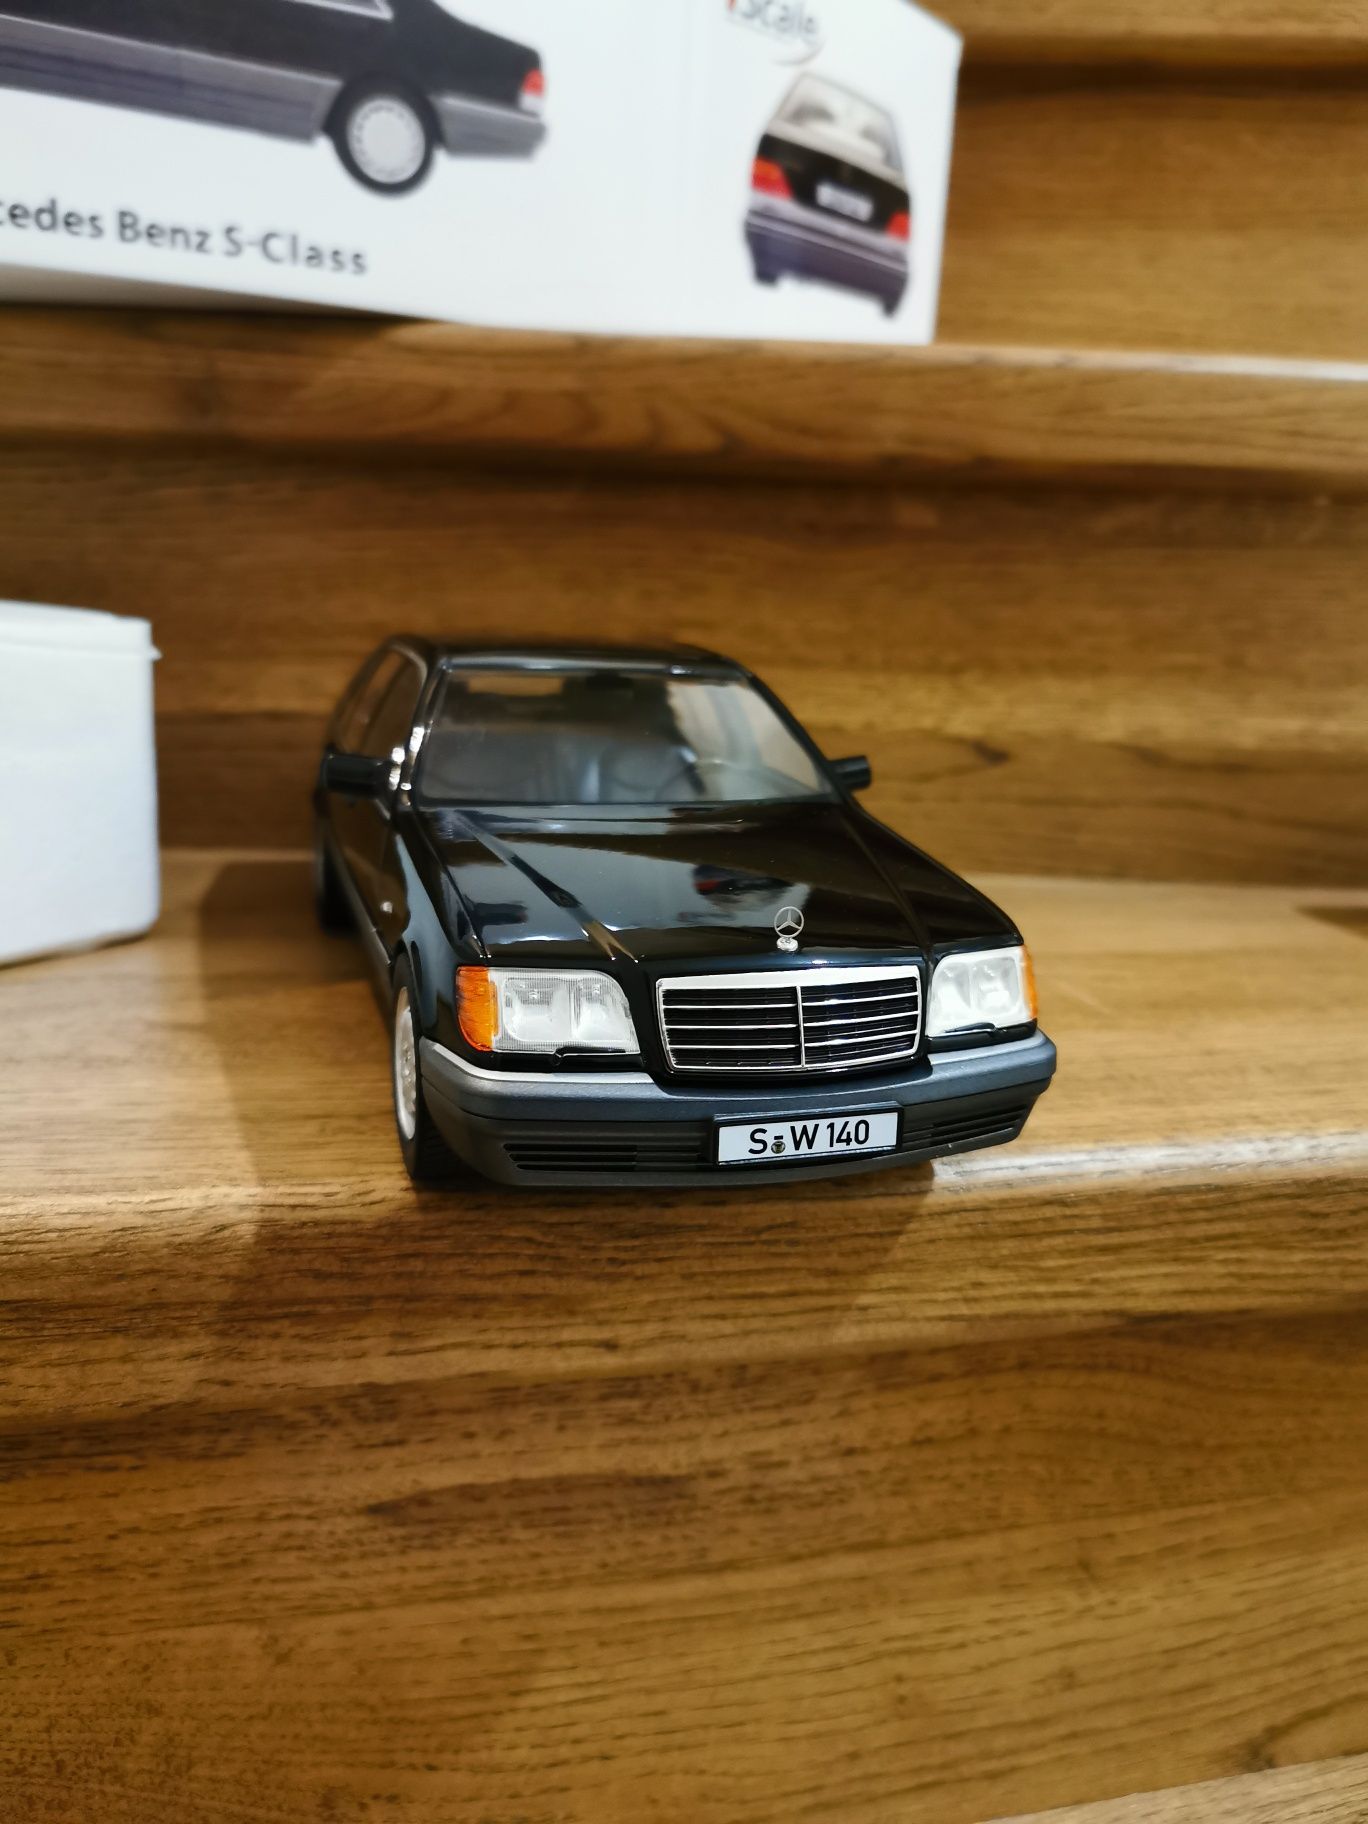 Mercedes-Beenz S-class w140 iScale 1/18